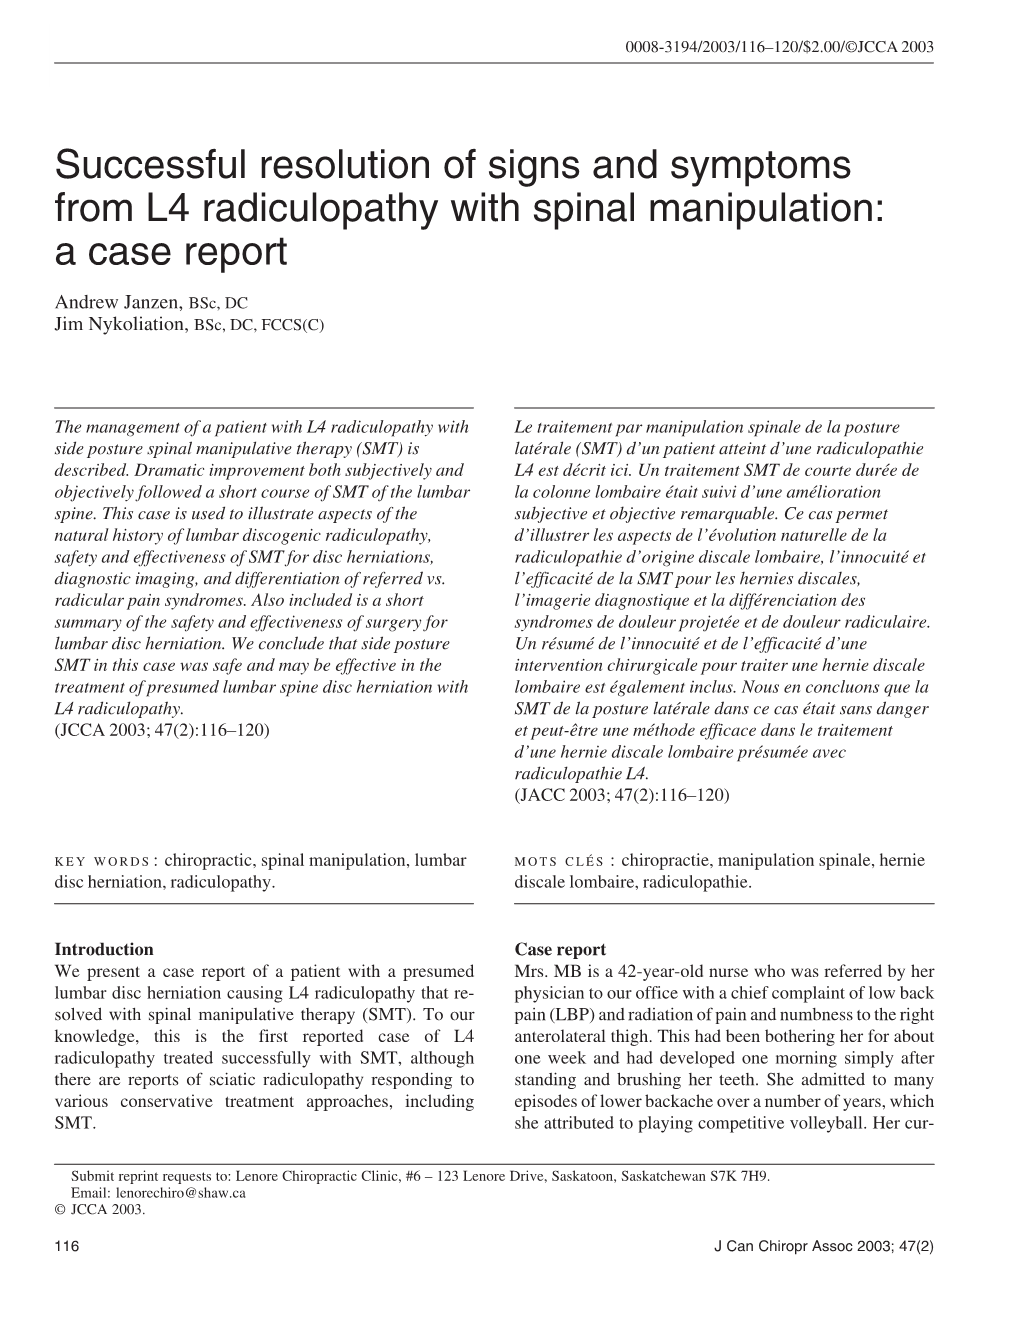 Successful Resolution of Signs and Symptoms from L4 Radiculopathy with Spinal Manipulation: a Case Report